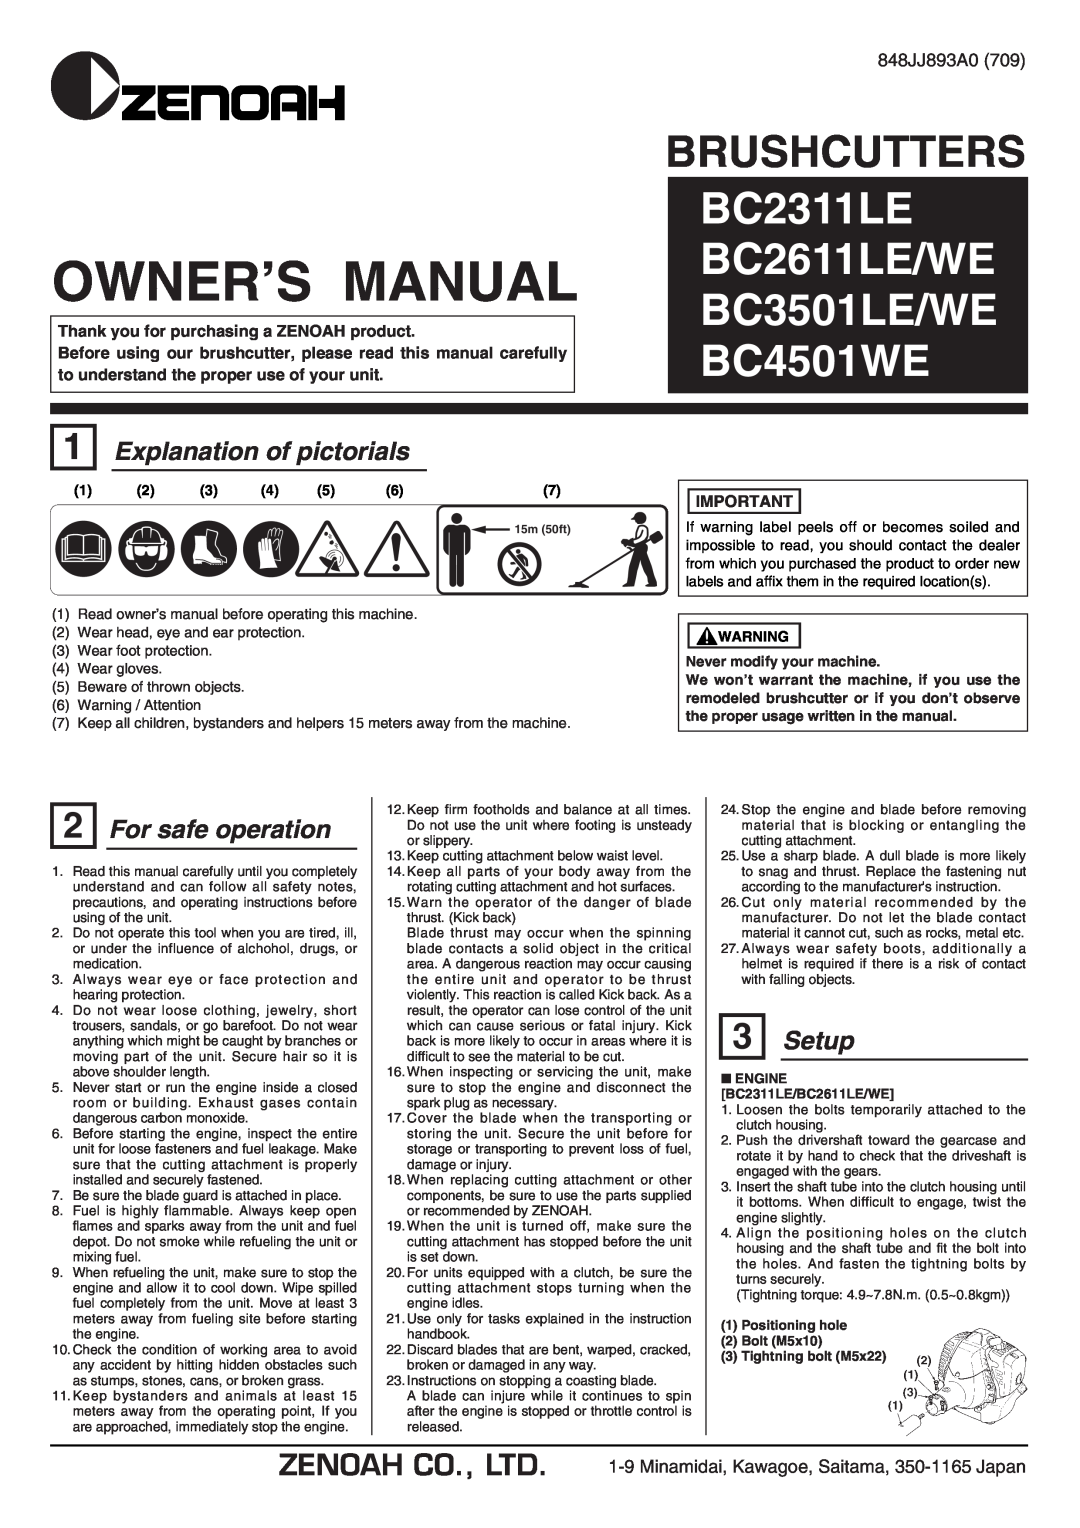 Zenoah BC2311LE owner manual Explanation of pictorials, For safe operation, Setup, Never modify your machine, Brushcutters 